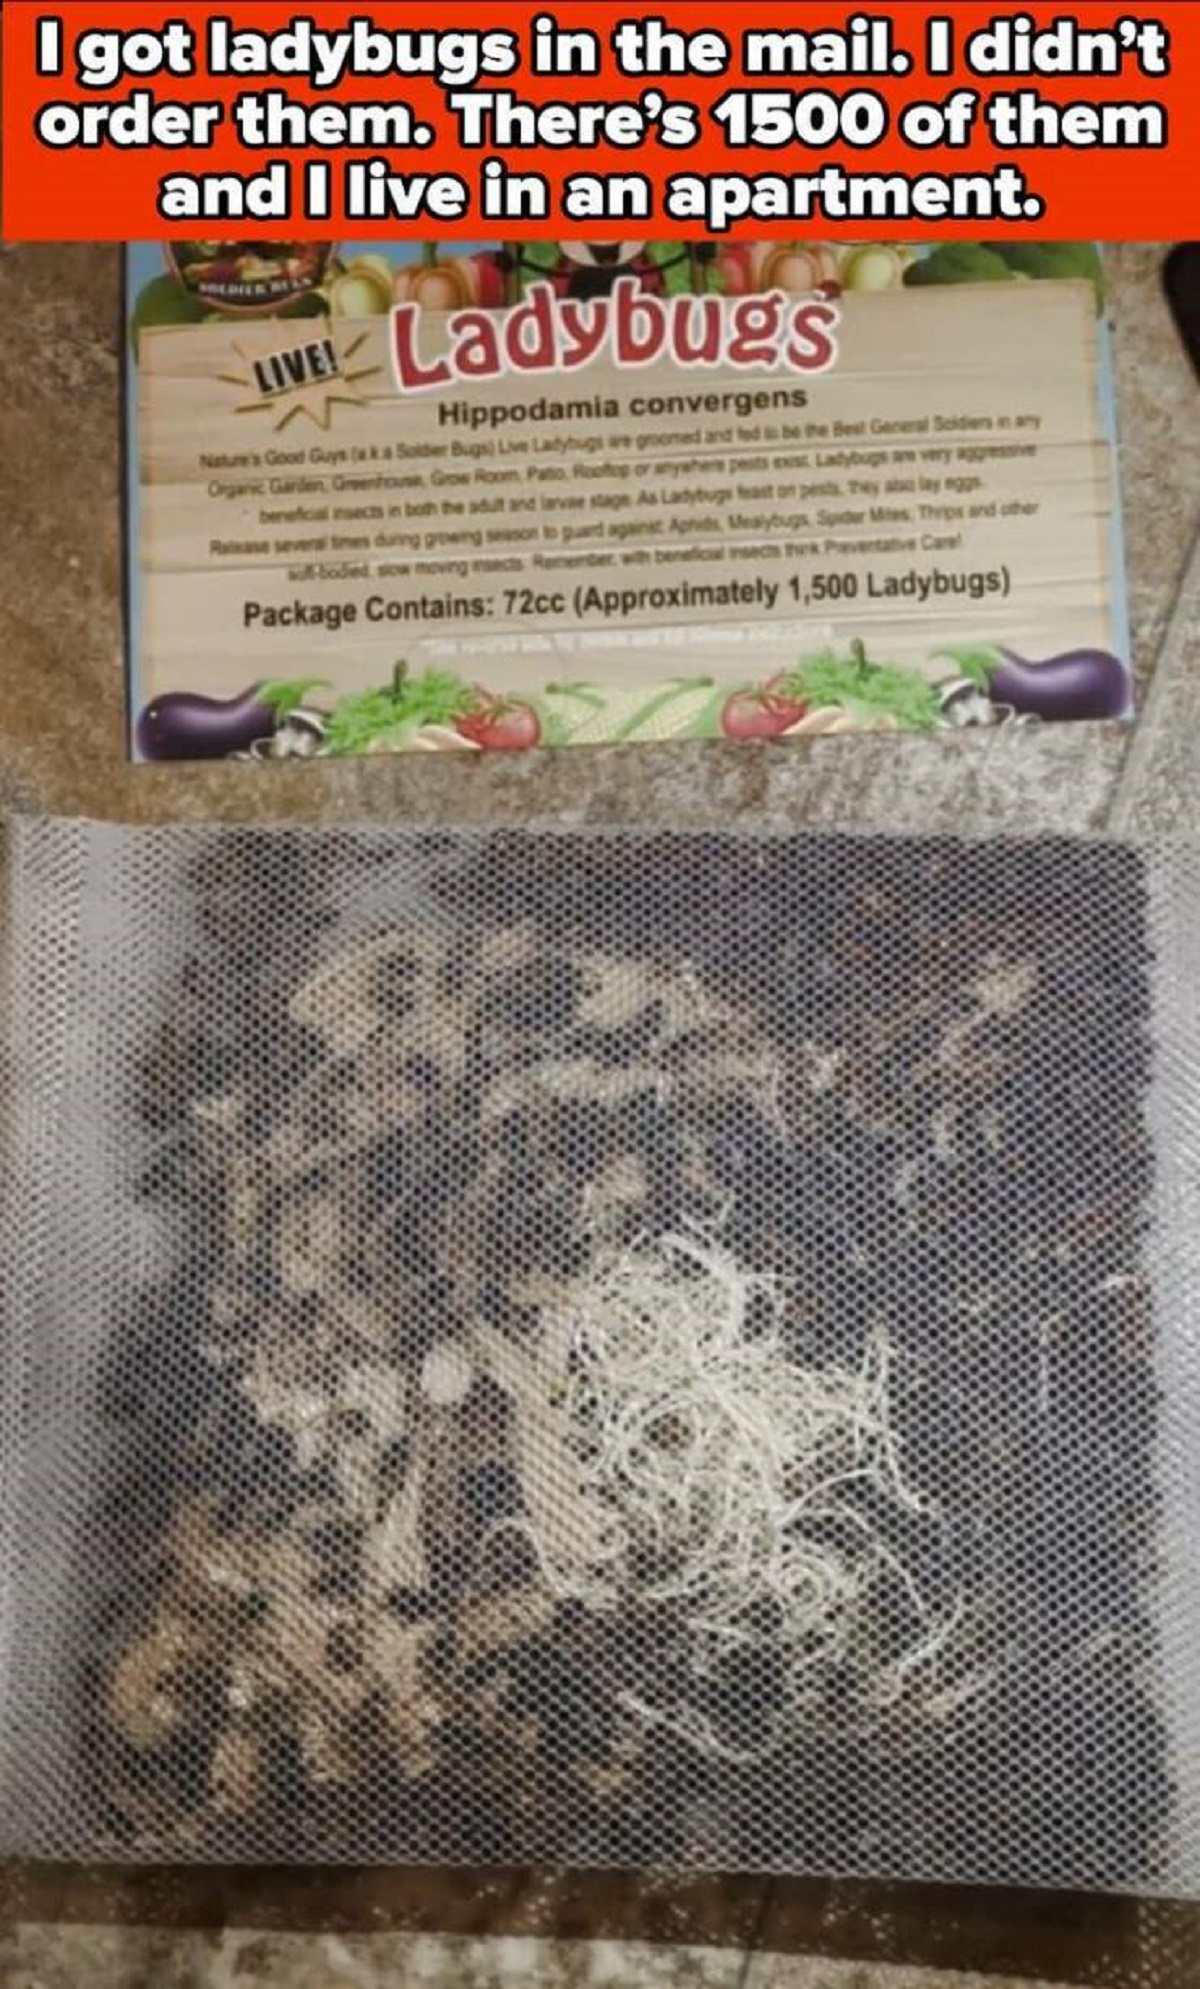 needlework - I got ladybugs in the mail. I didn't order them. There's 1500 of them and I live in an apartment. Ladybugs Livel Hippodamia convergensi Package Contains 72cc Approximately 1,500 Ladybugs